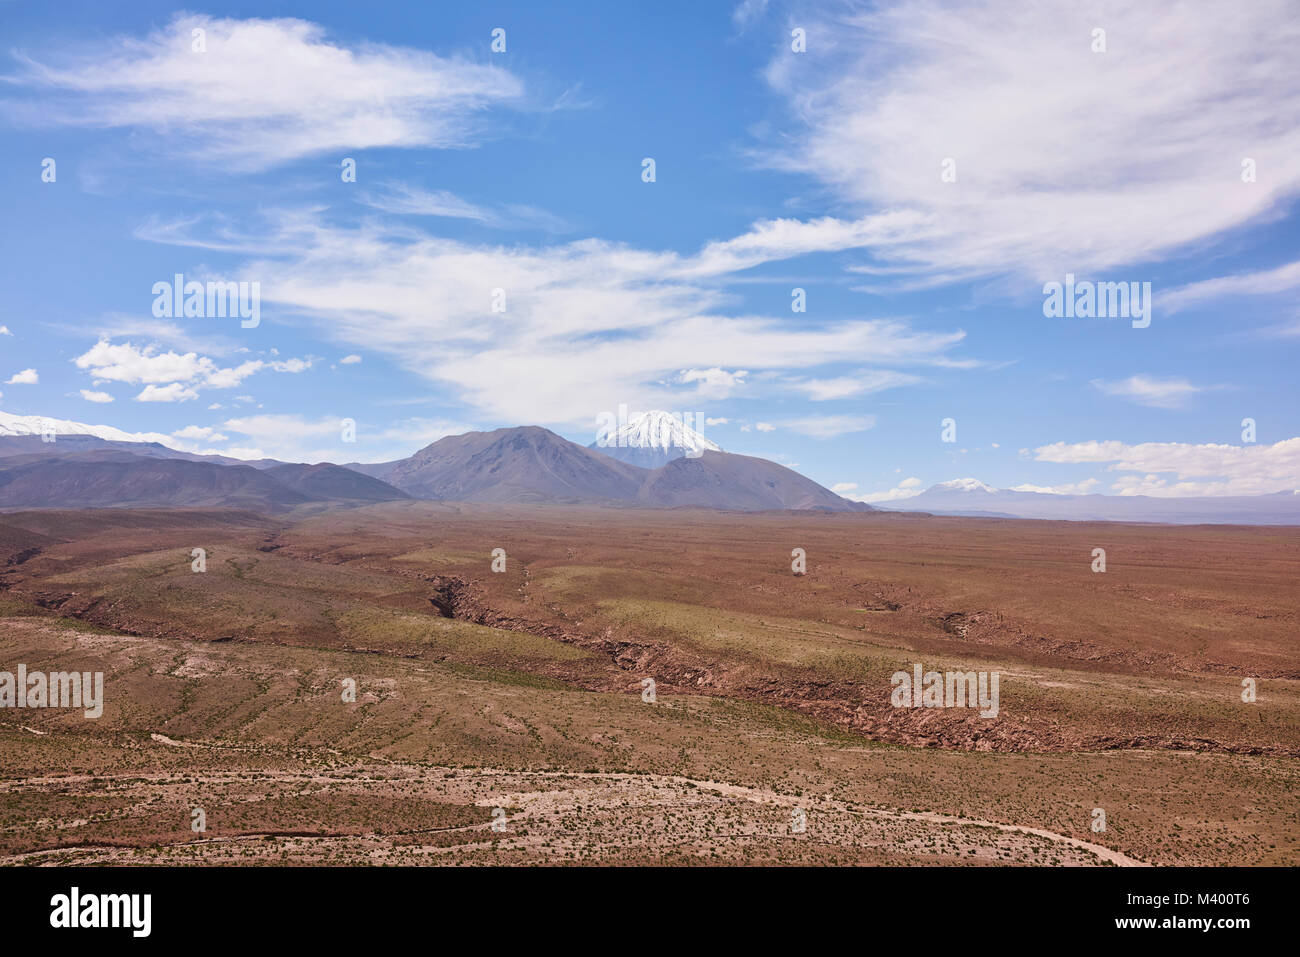 Arid landscape of the Atacama desert with the Andes Mountain range in the background. A clear blue sky with clouds hangs above. Stock Photo